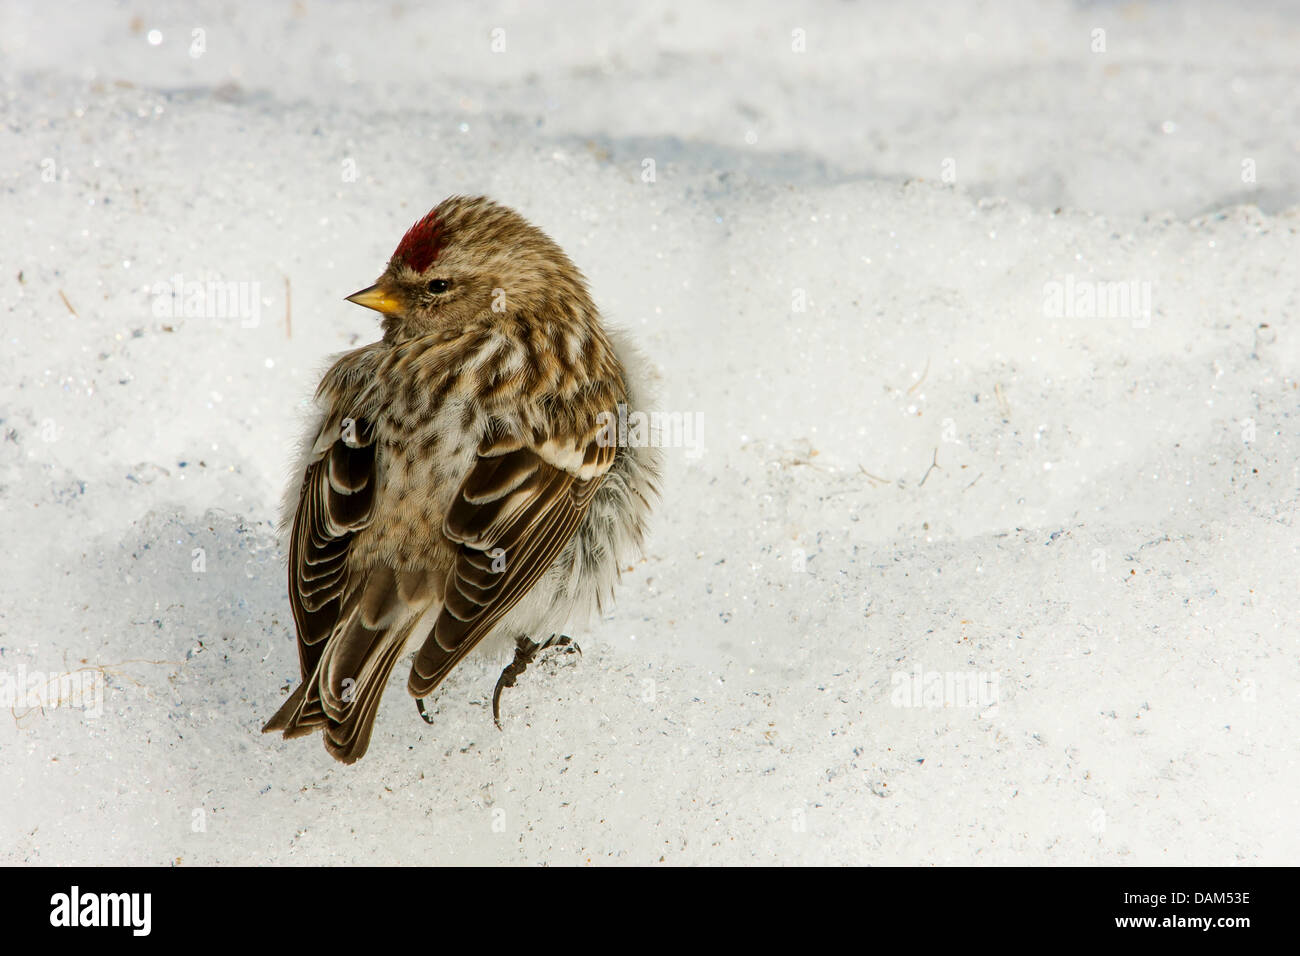 redpoll, common redpoll (Carduelis flammea, Acanthis flammea), sitting in snow, Sweden, Hamra National Park Stock Photo